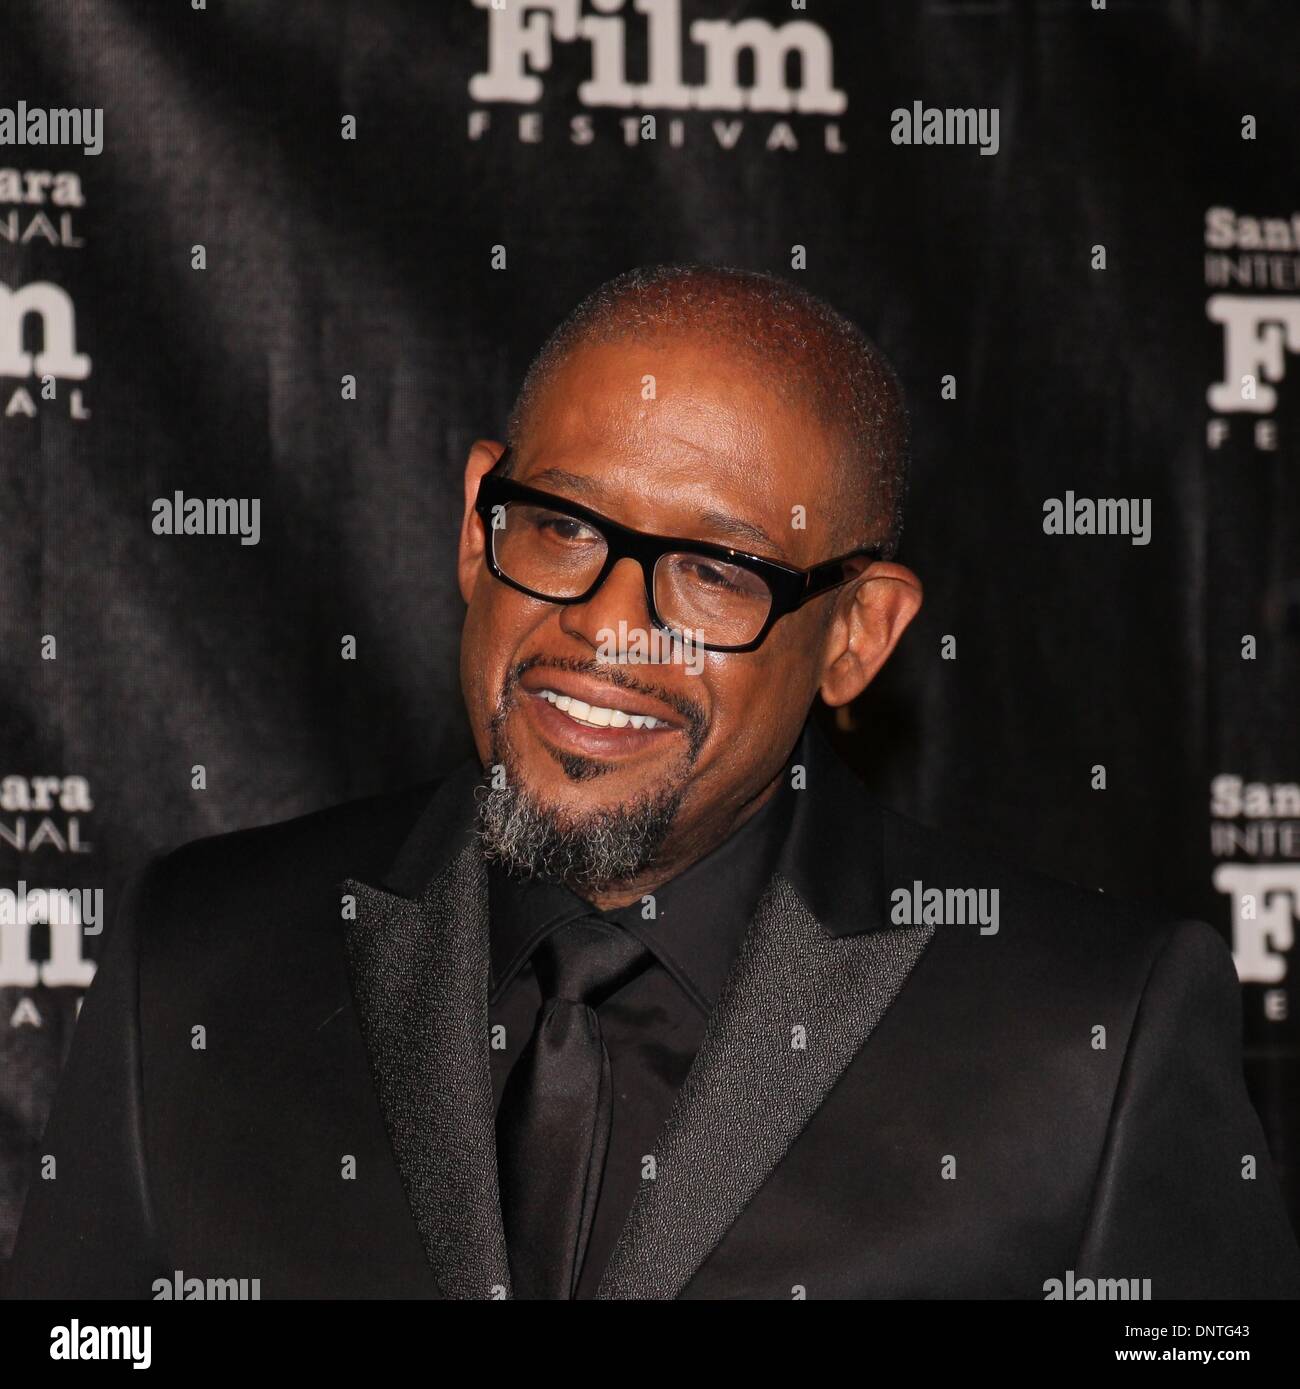 Santa Barbara, California USA – 5th January 2014. The red carpet arrivals for the Santa Barbara International Film Festival’s Kirk Douglas Award For Excellence in Film presented to Forest Whitaker at a black tie gala held at the Bacara Resort & Spa. Photo: Forest Whitaker. Credit: Lisa Werner/Alamy Live News Stock Photo